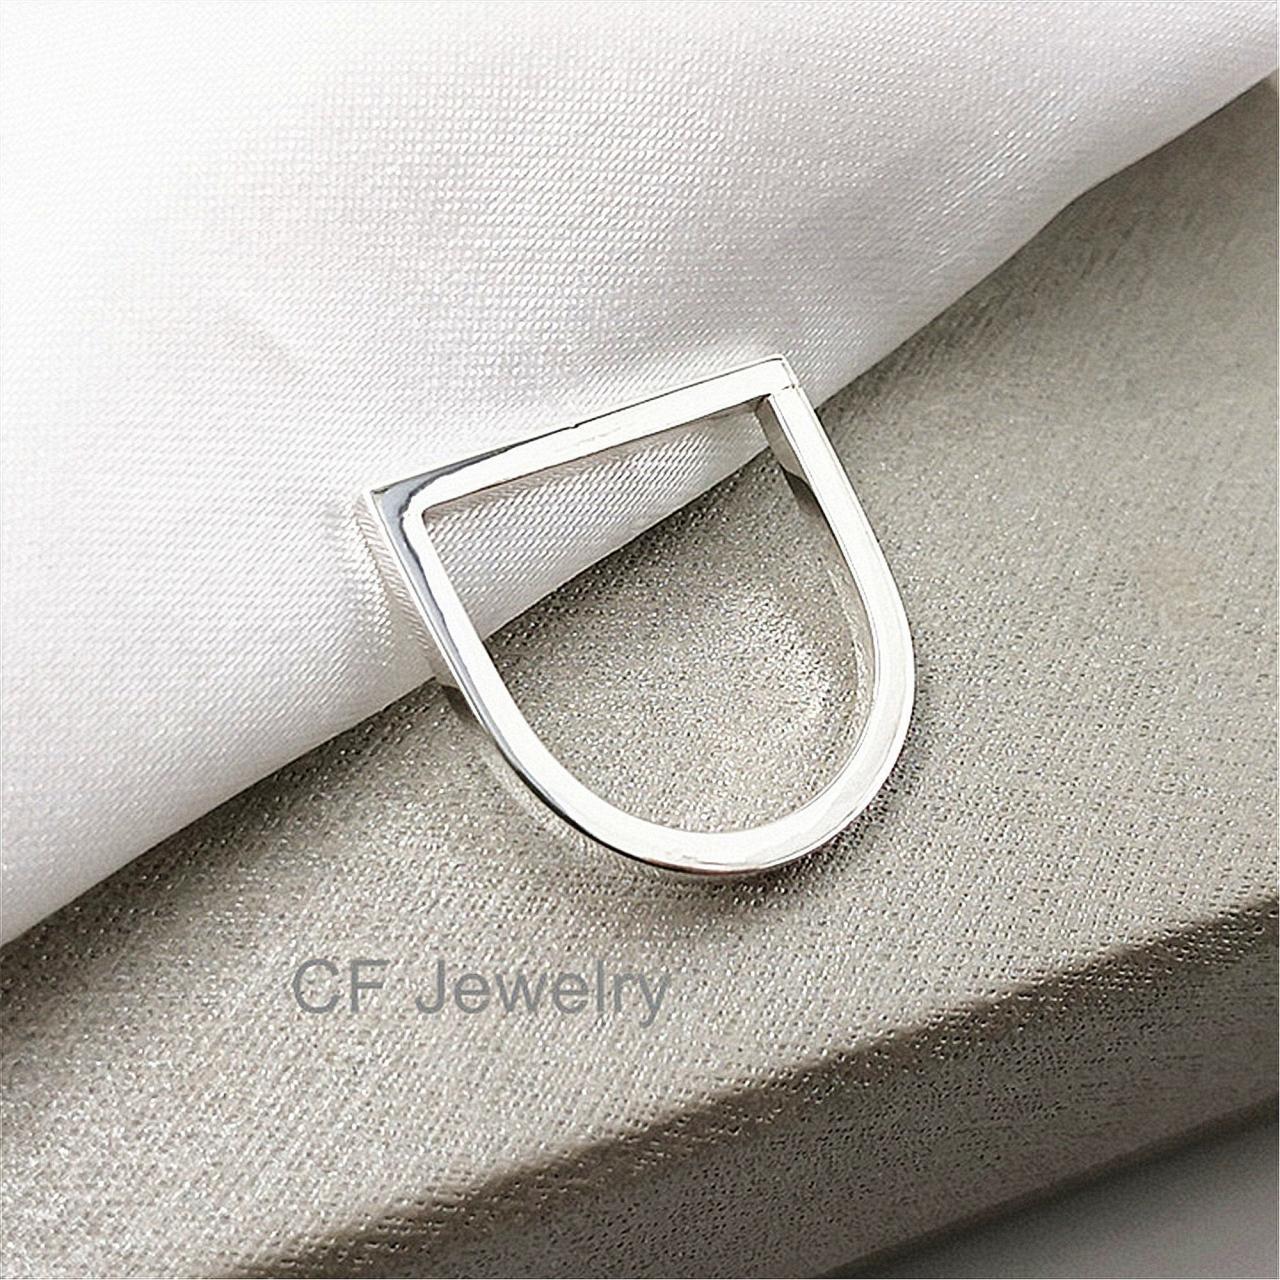 Sterling Silver Horizontal Bar Ring Free Engraving Initial Rings Personalized Ring Letter Rings Statement Ring Bar Jewelry Modern Rings Contemporary Ring Designs